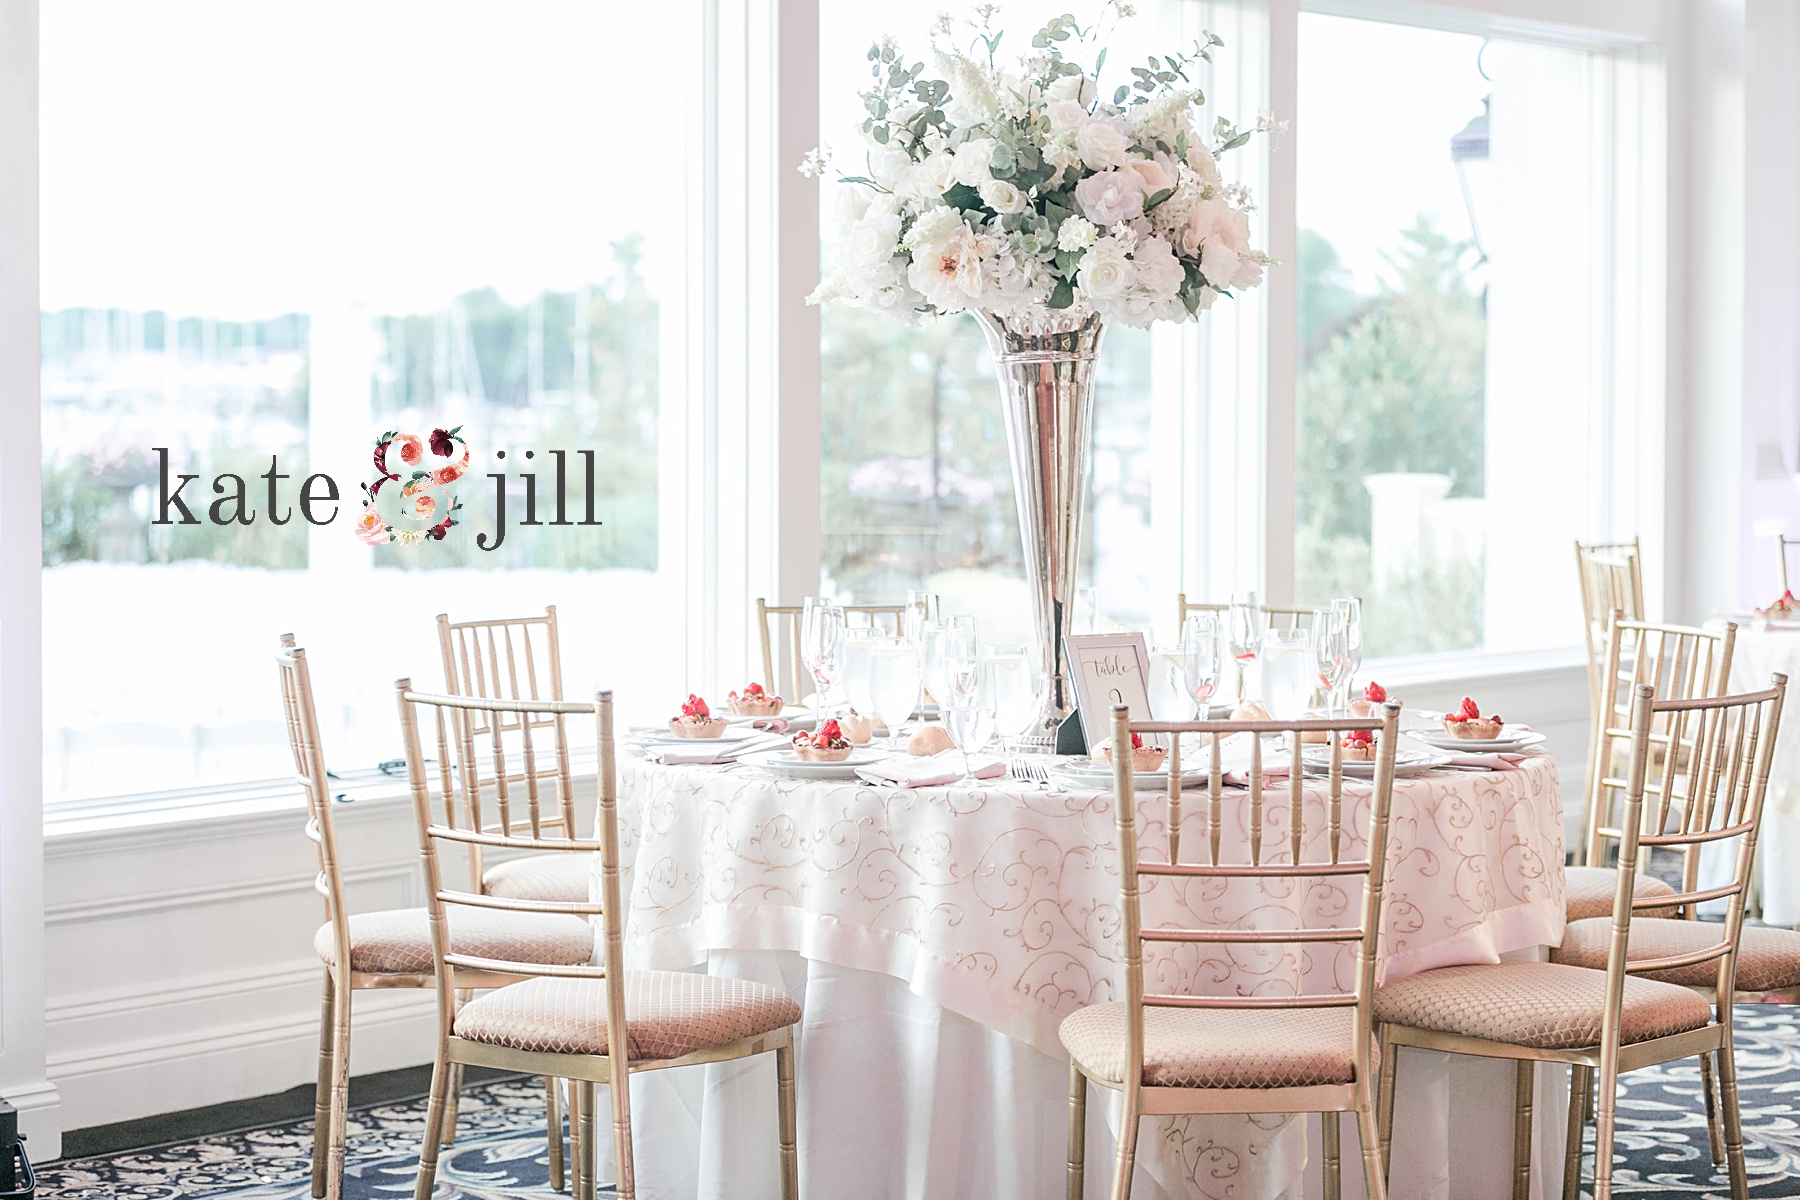 reception details at clarks landing yacht club